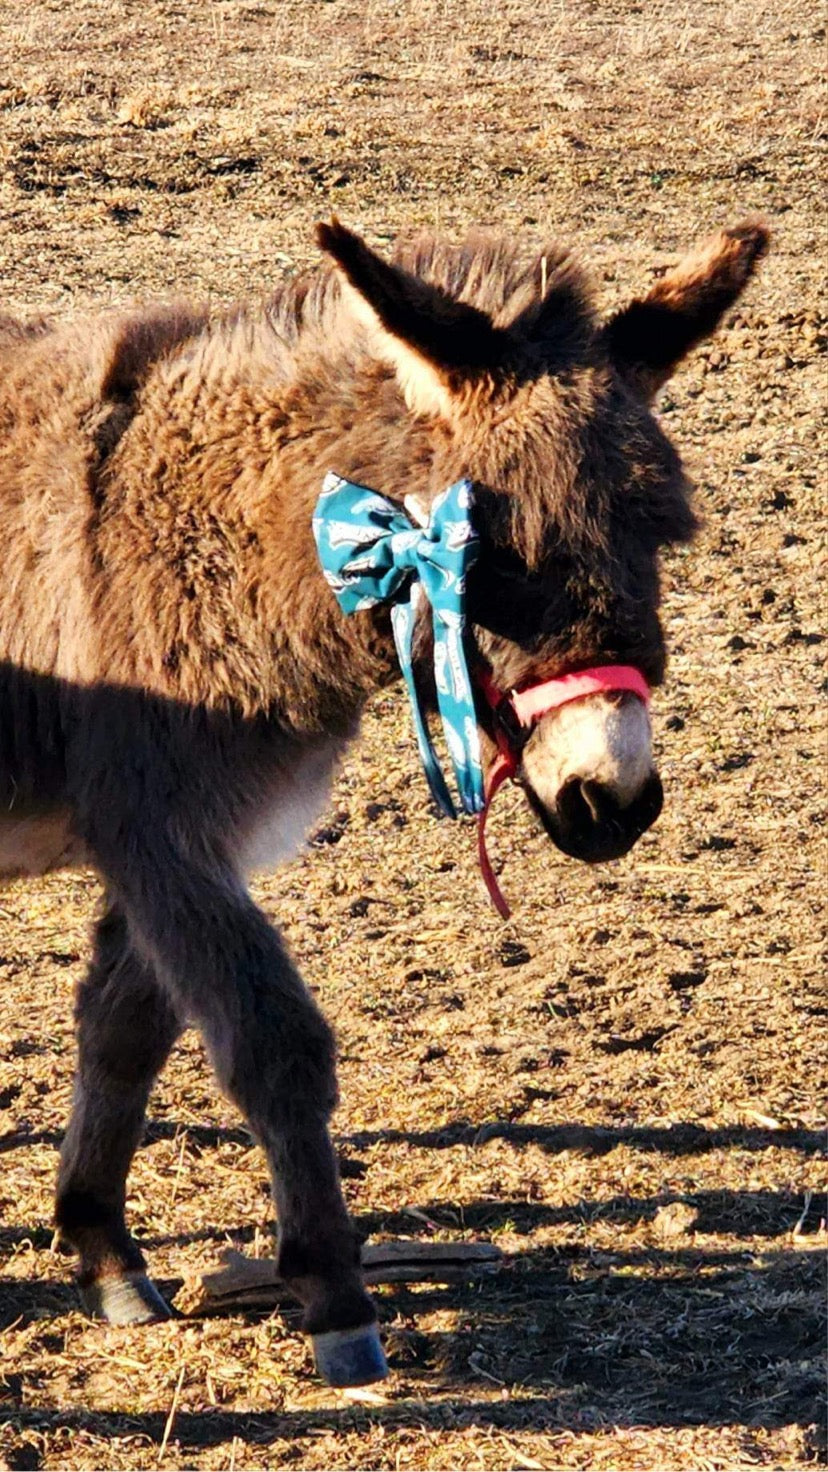 Gladys the donkey showing Eagles pride